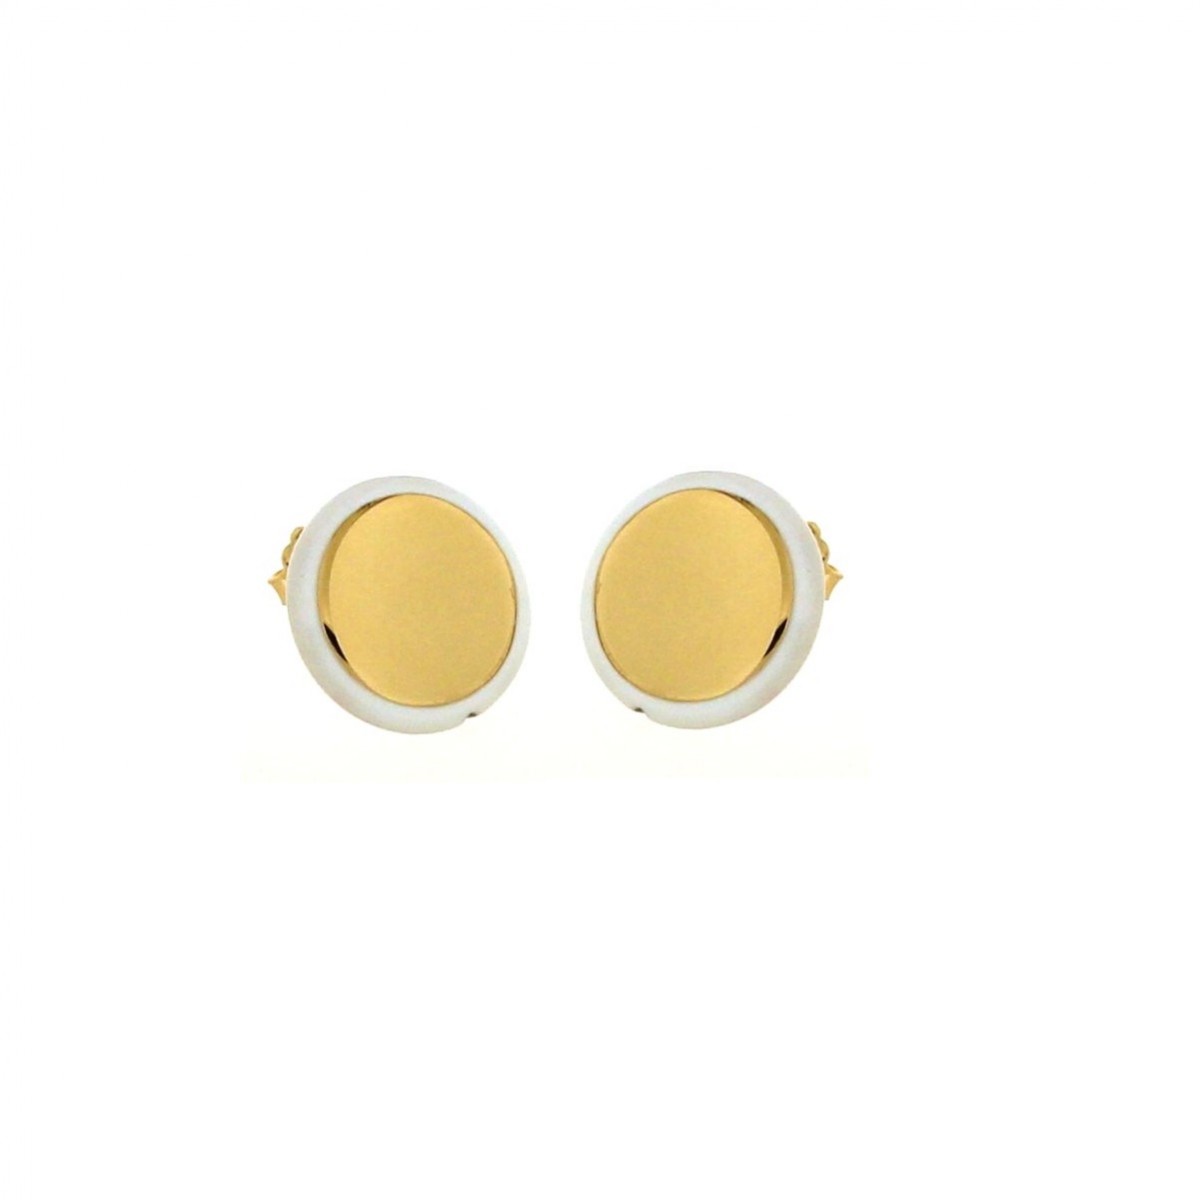 SILVER EARINGS WHITE AND GOLD VERITA TRUE LUXURY